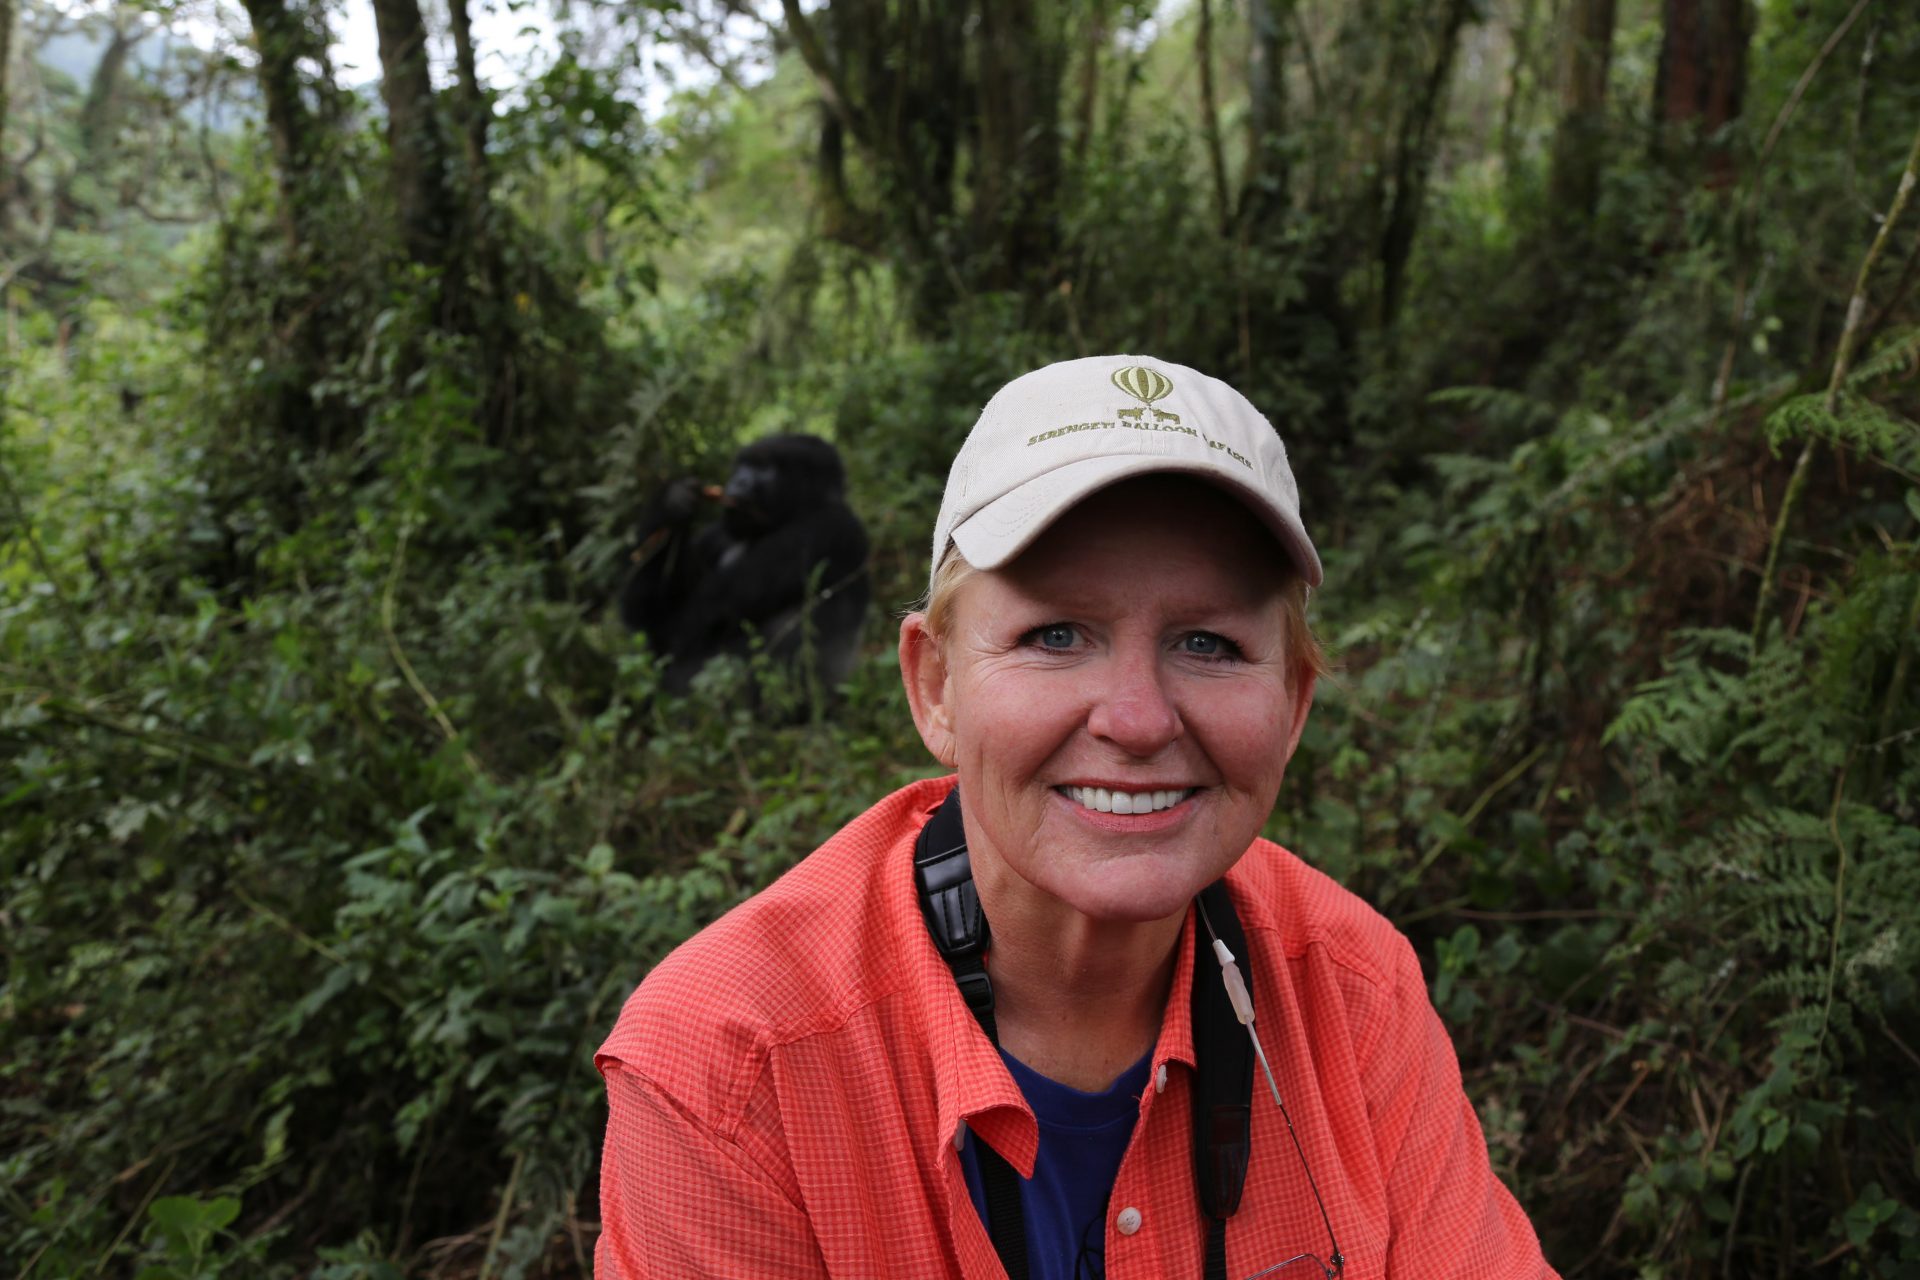 Following Silverback Gorillas in Rwanda.  We had to hike for several hours up the mountain, an hour with the gorillas and then trek down.